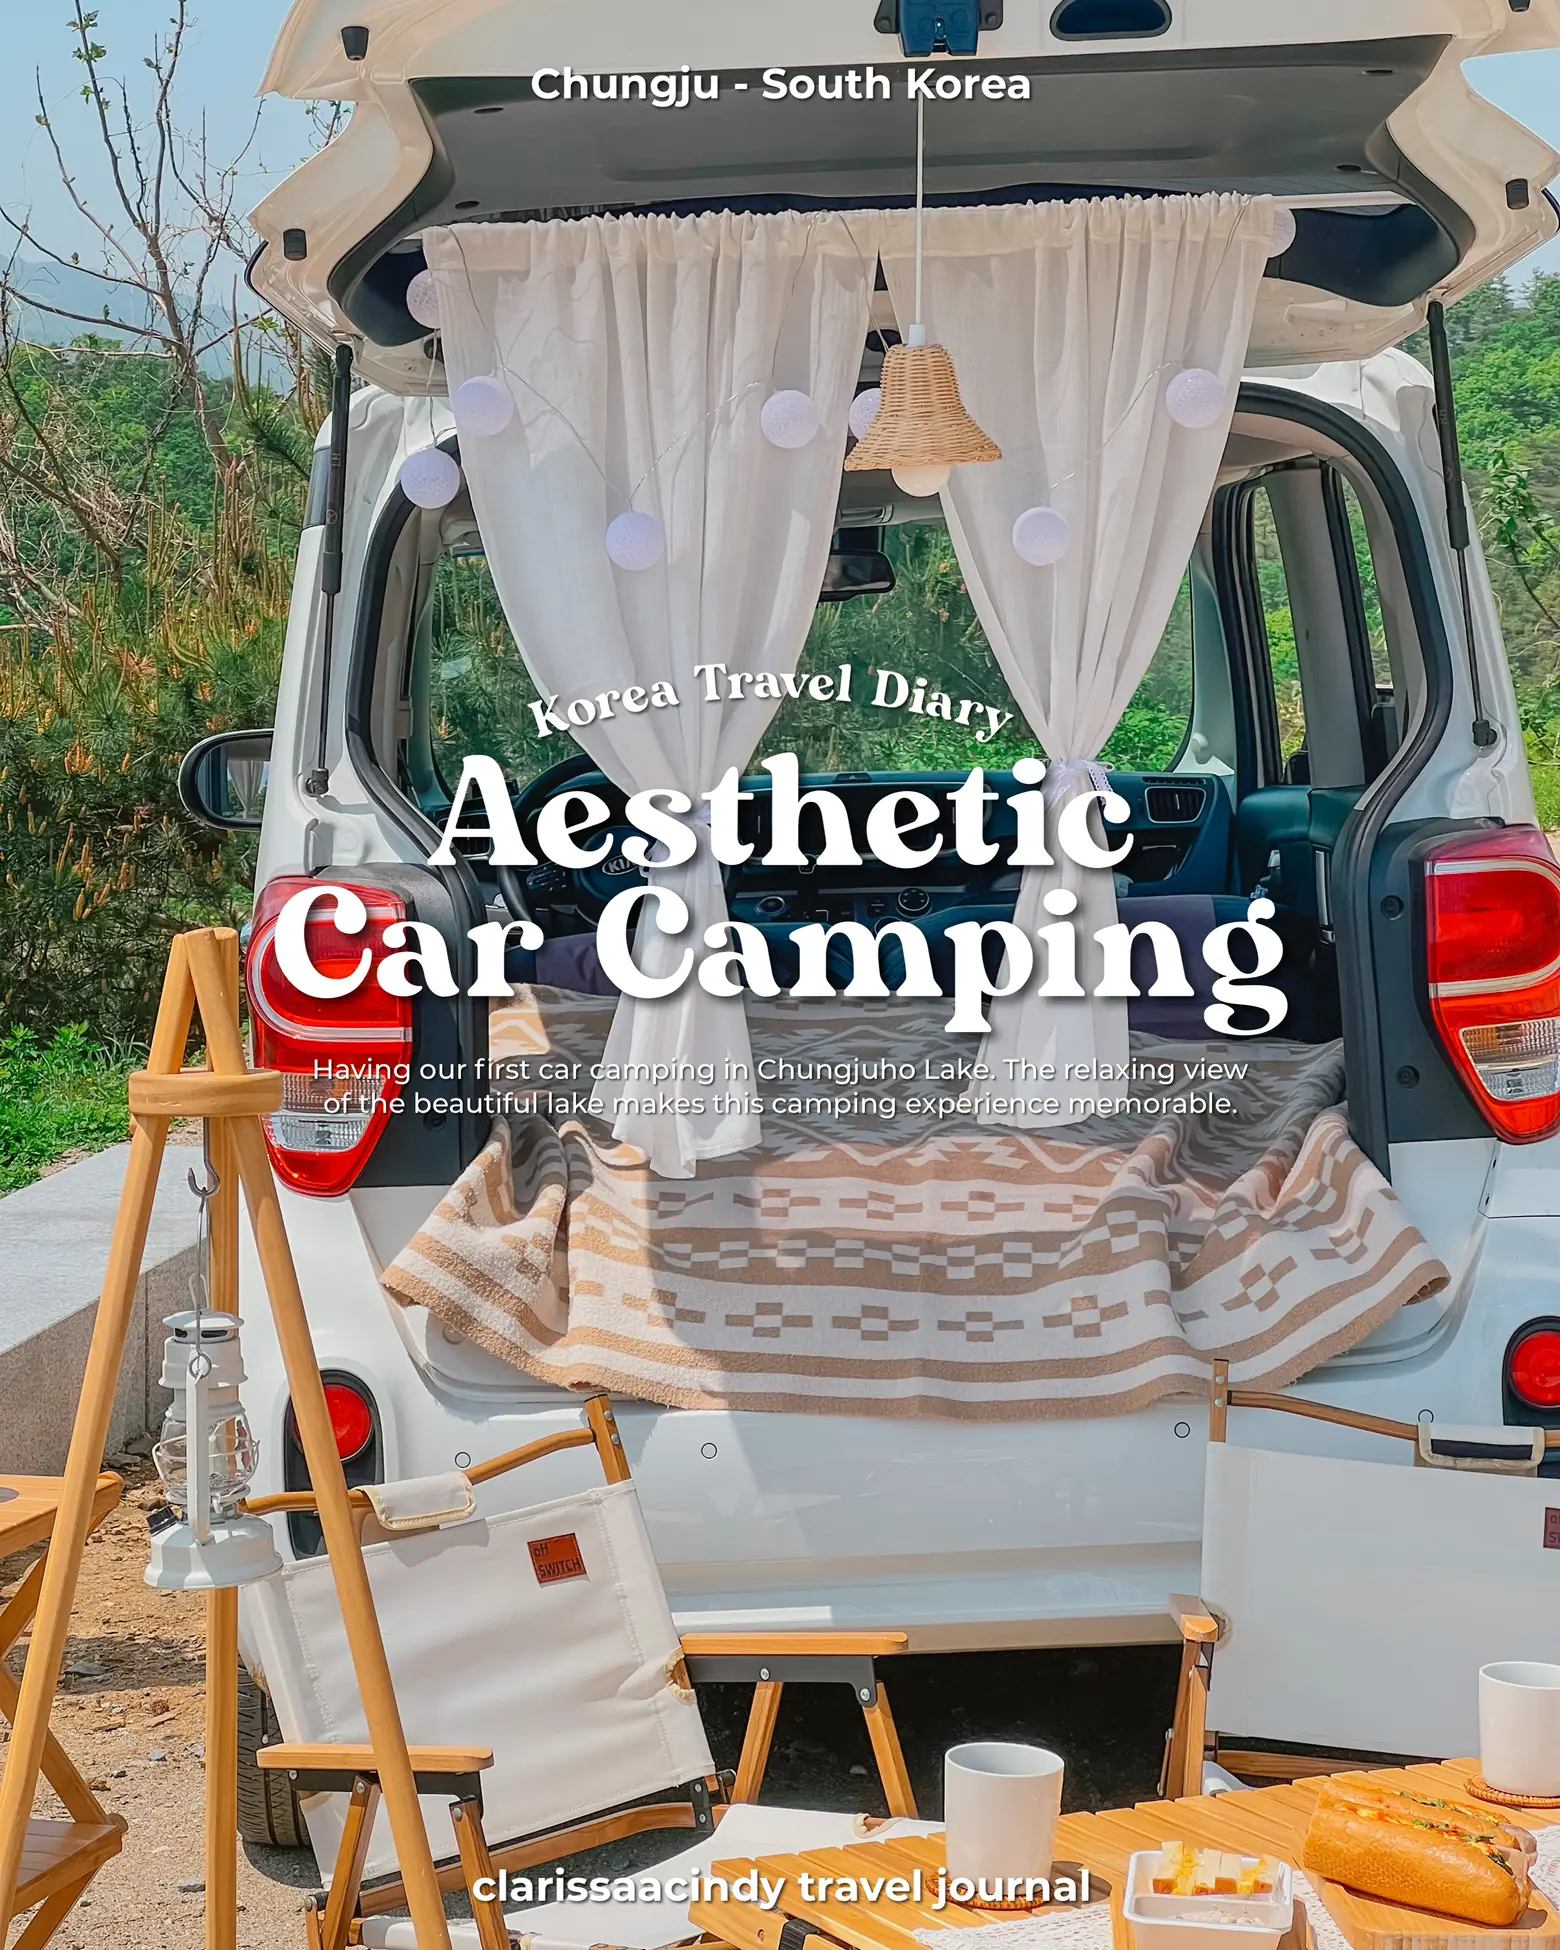 ⛺️Renting an Aesthetic Car Camping equipments, Gallery posted by  clarissaacindy